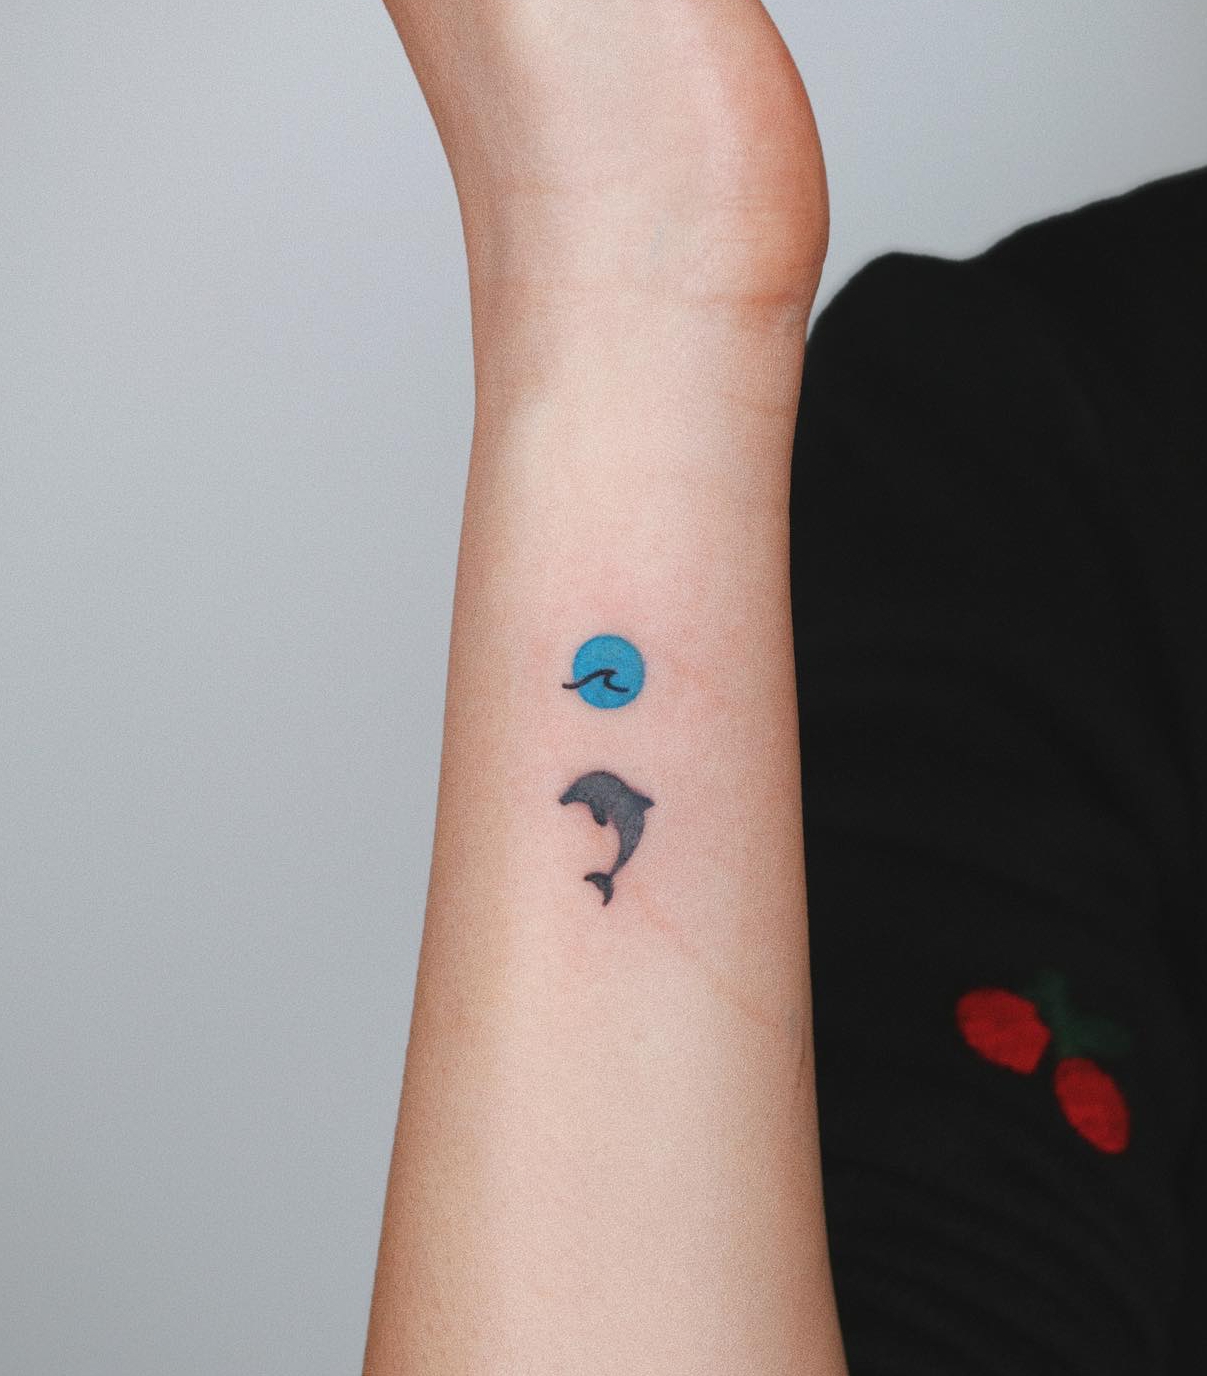 Hidden Semicolon Tattoo in the Form of Sun and Dolphin